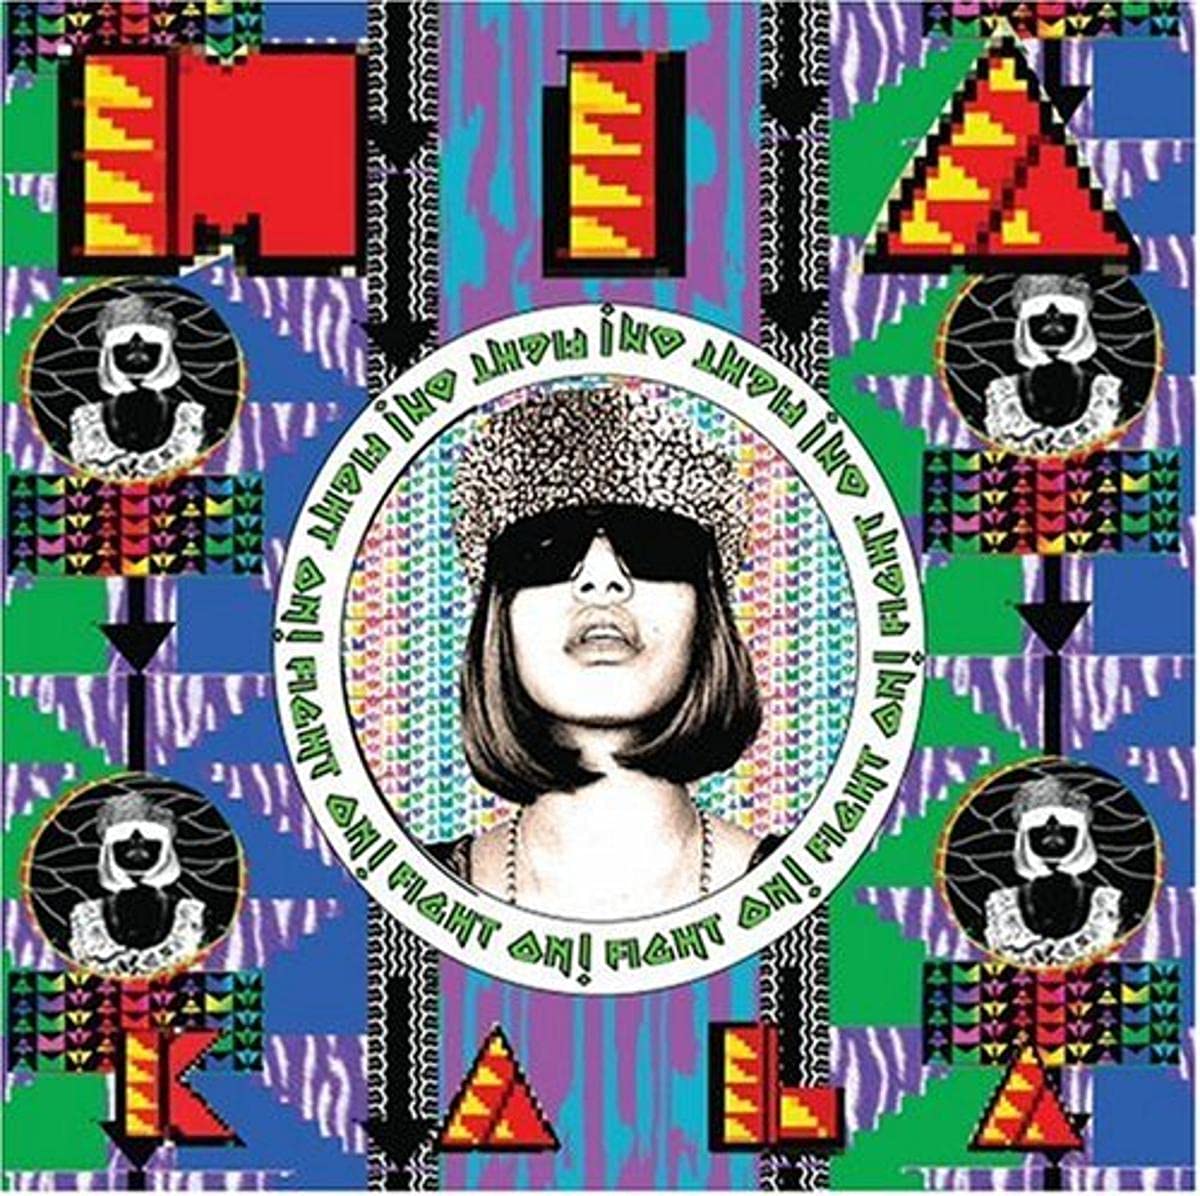 Art for Come Around (Feat. Timbaland) by M.I.A.